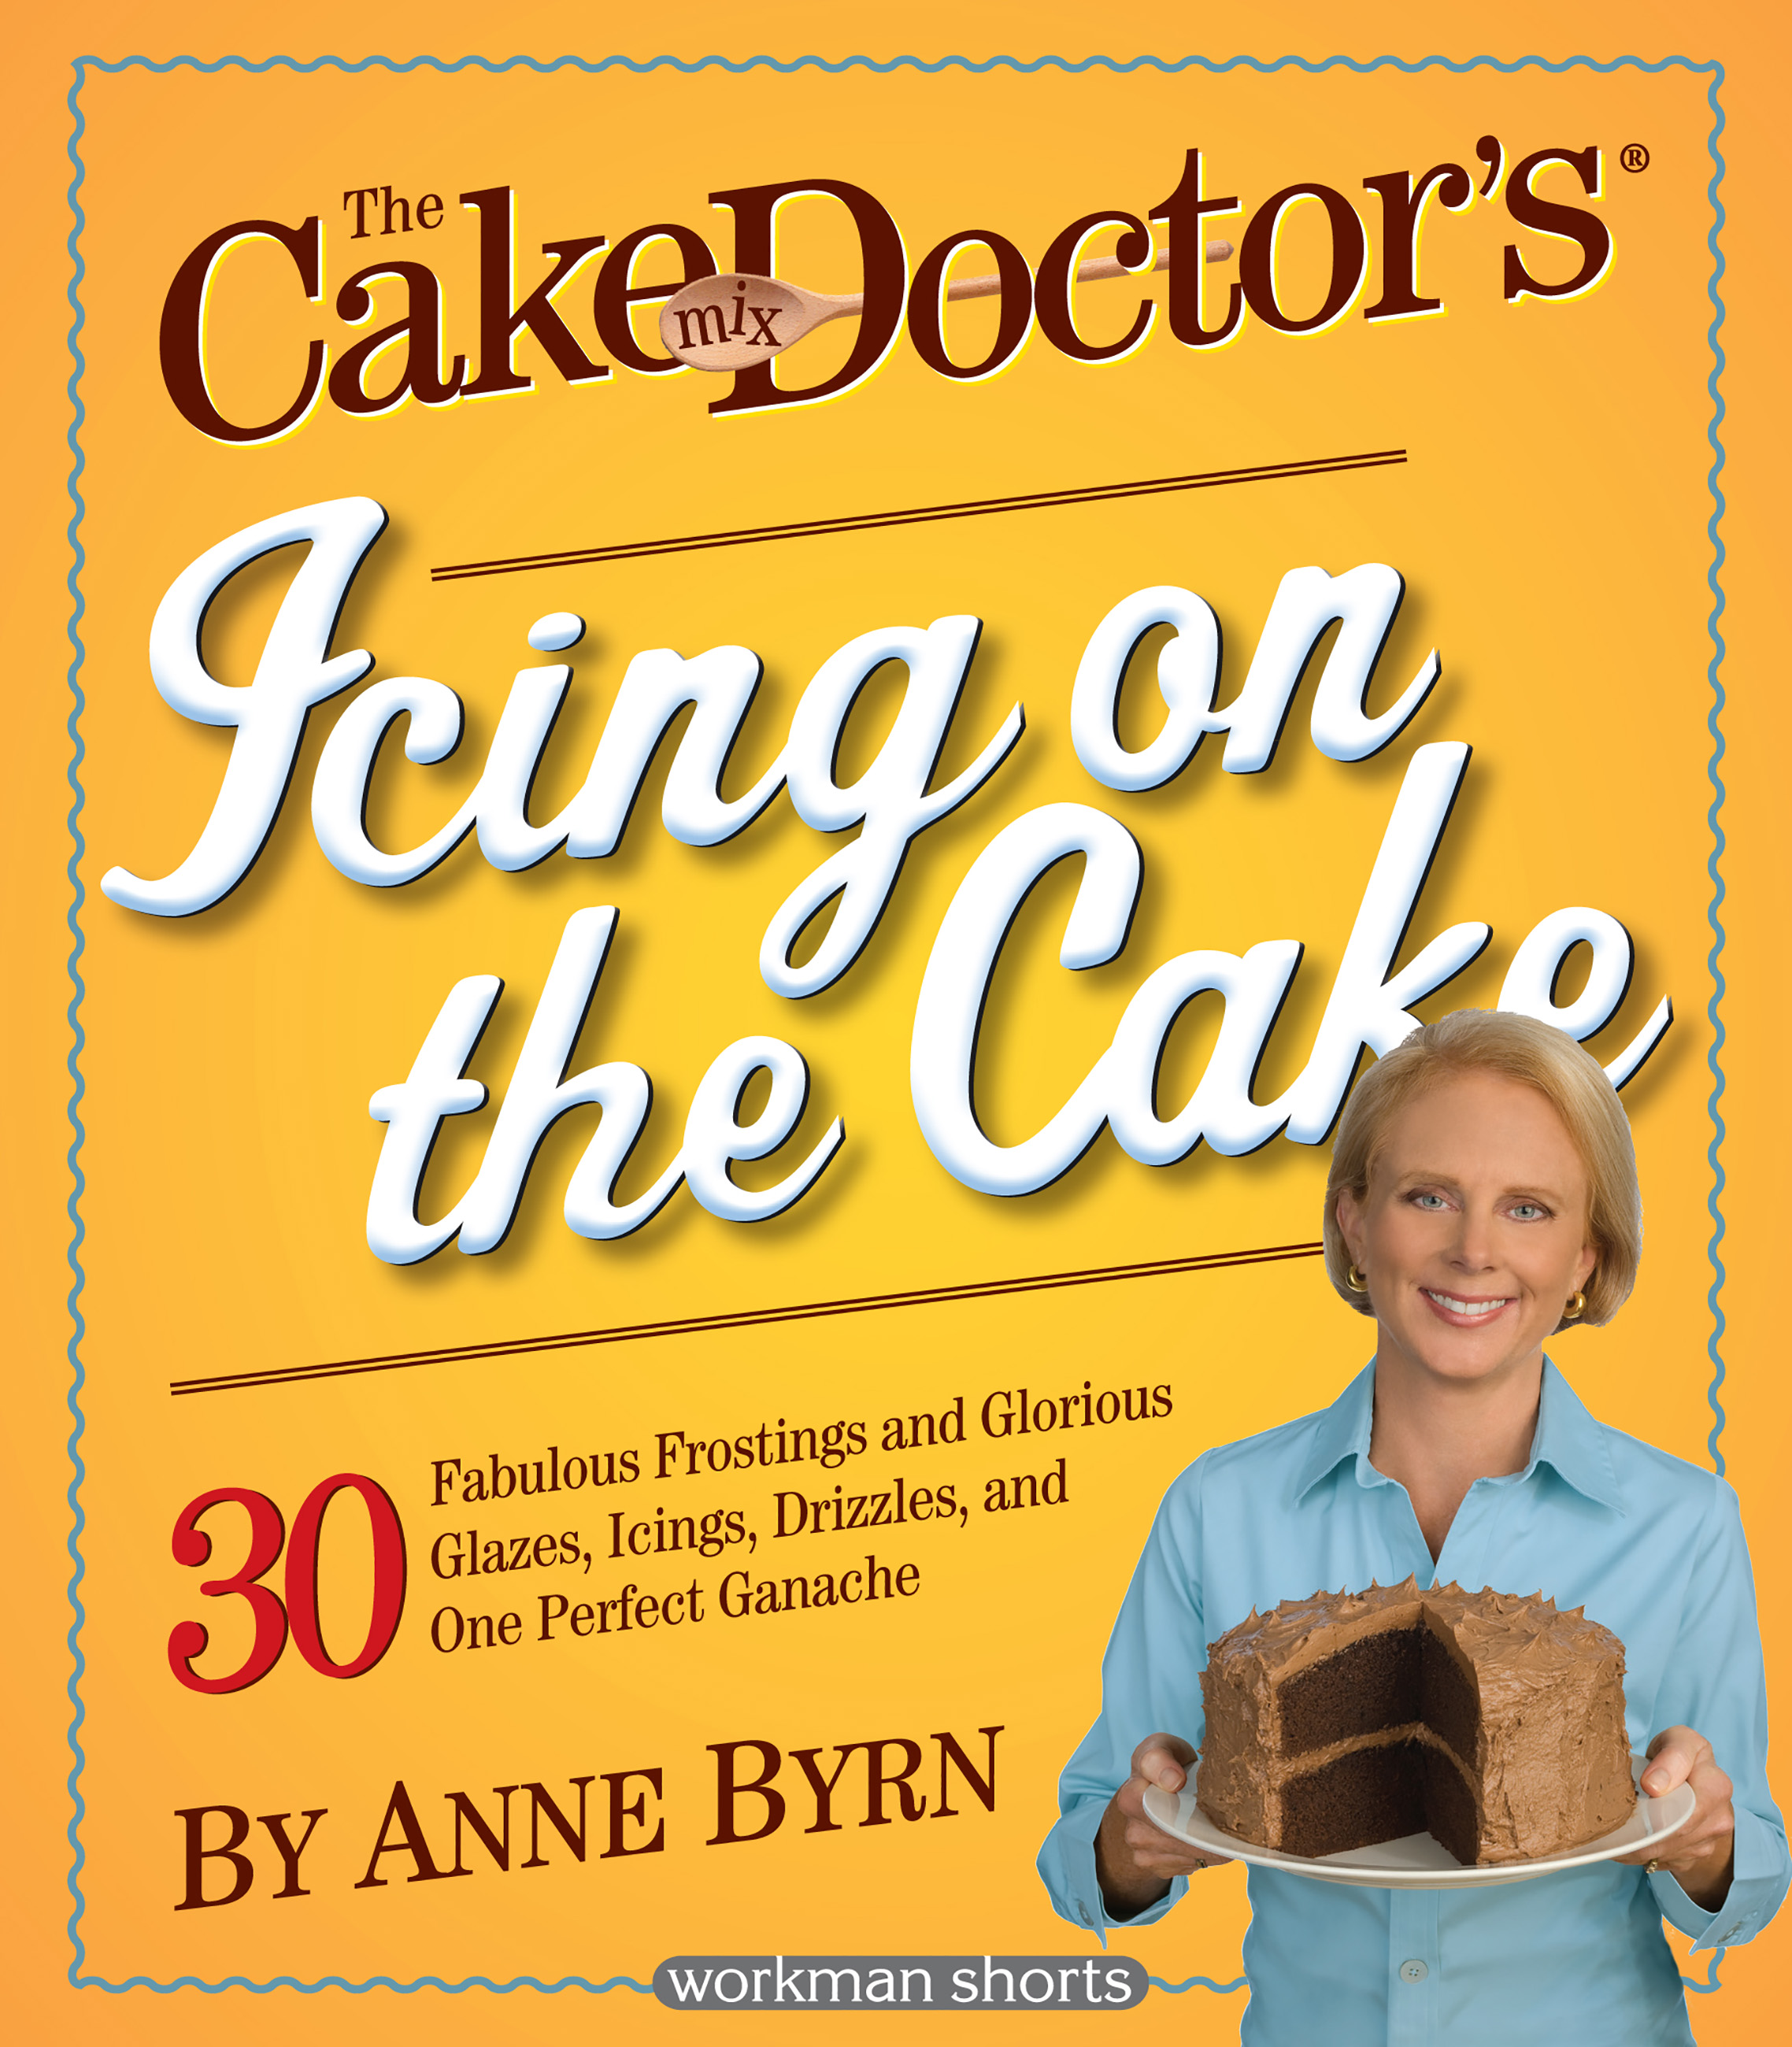 The cake mix doctor's icing on the cake: 30 fabulous frostings and glorious glazes, icings, drizzles, and one perfect ganache cover image